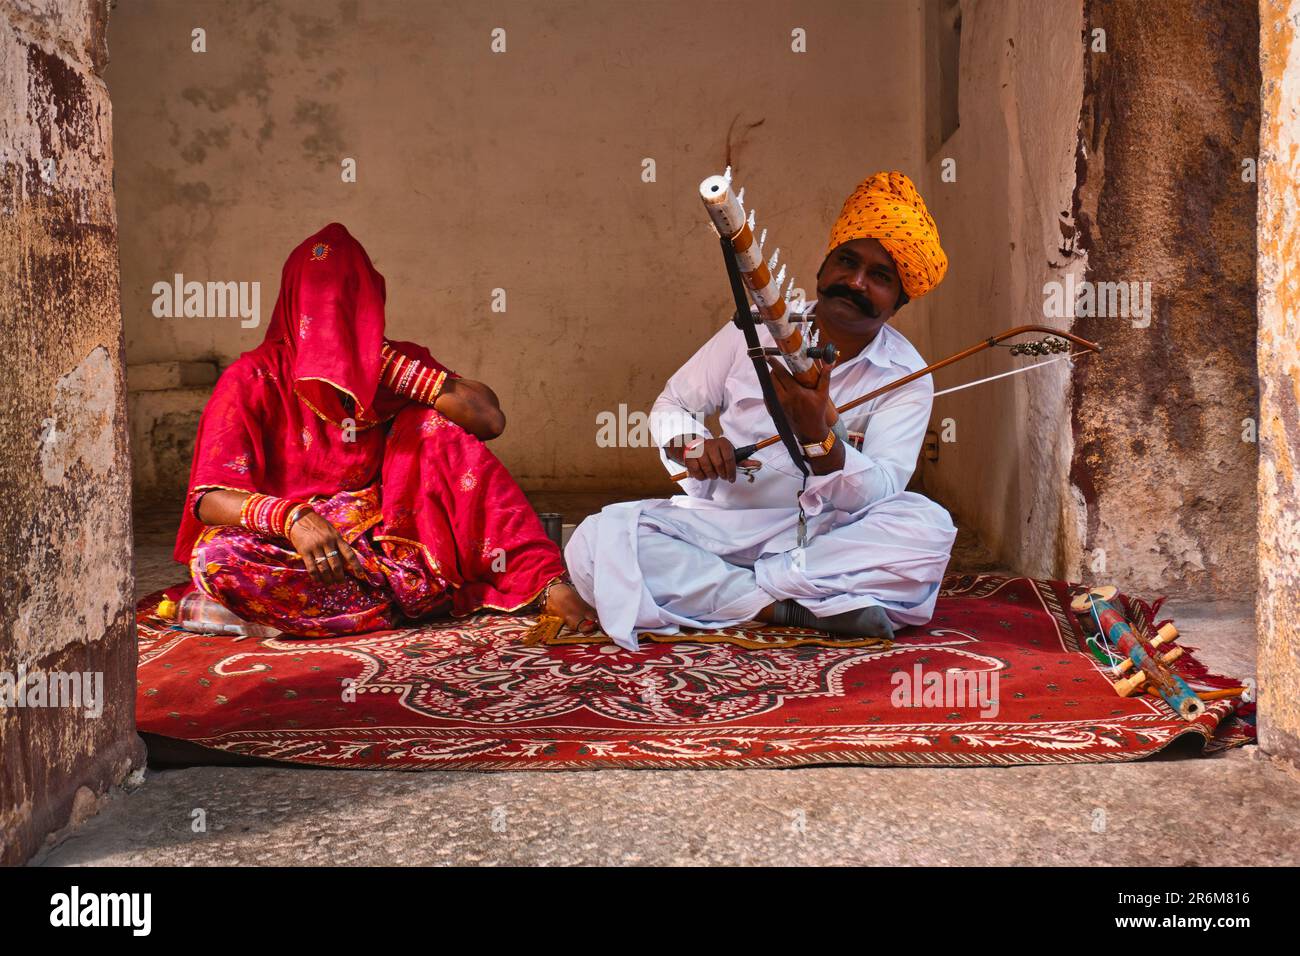 Musicians playing in singing traditional Rajasthani songs and music in Mehrangarh fort, Rajasthan, India Stock Photo